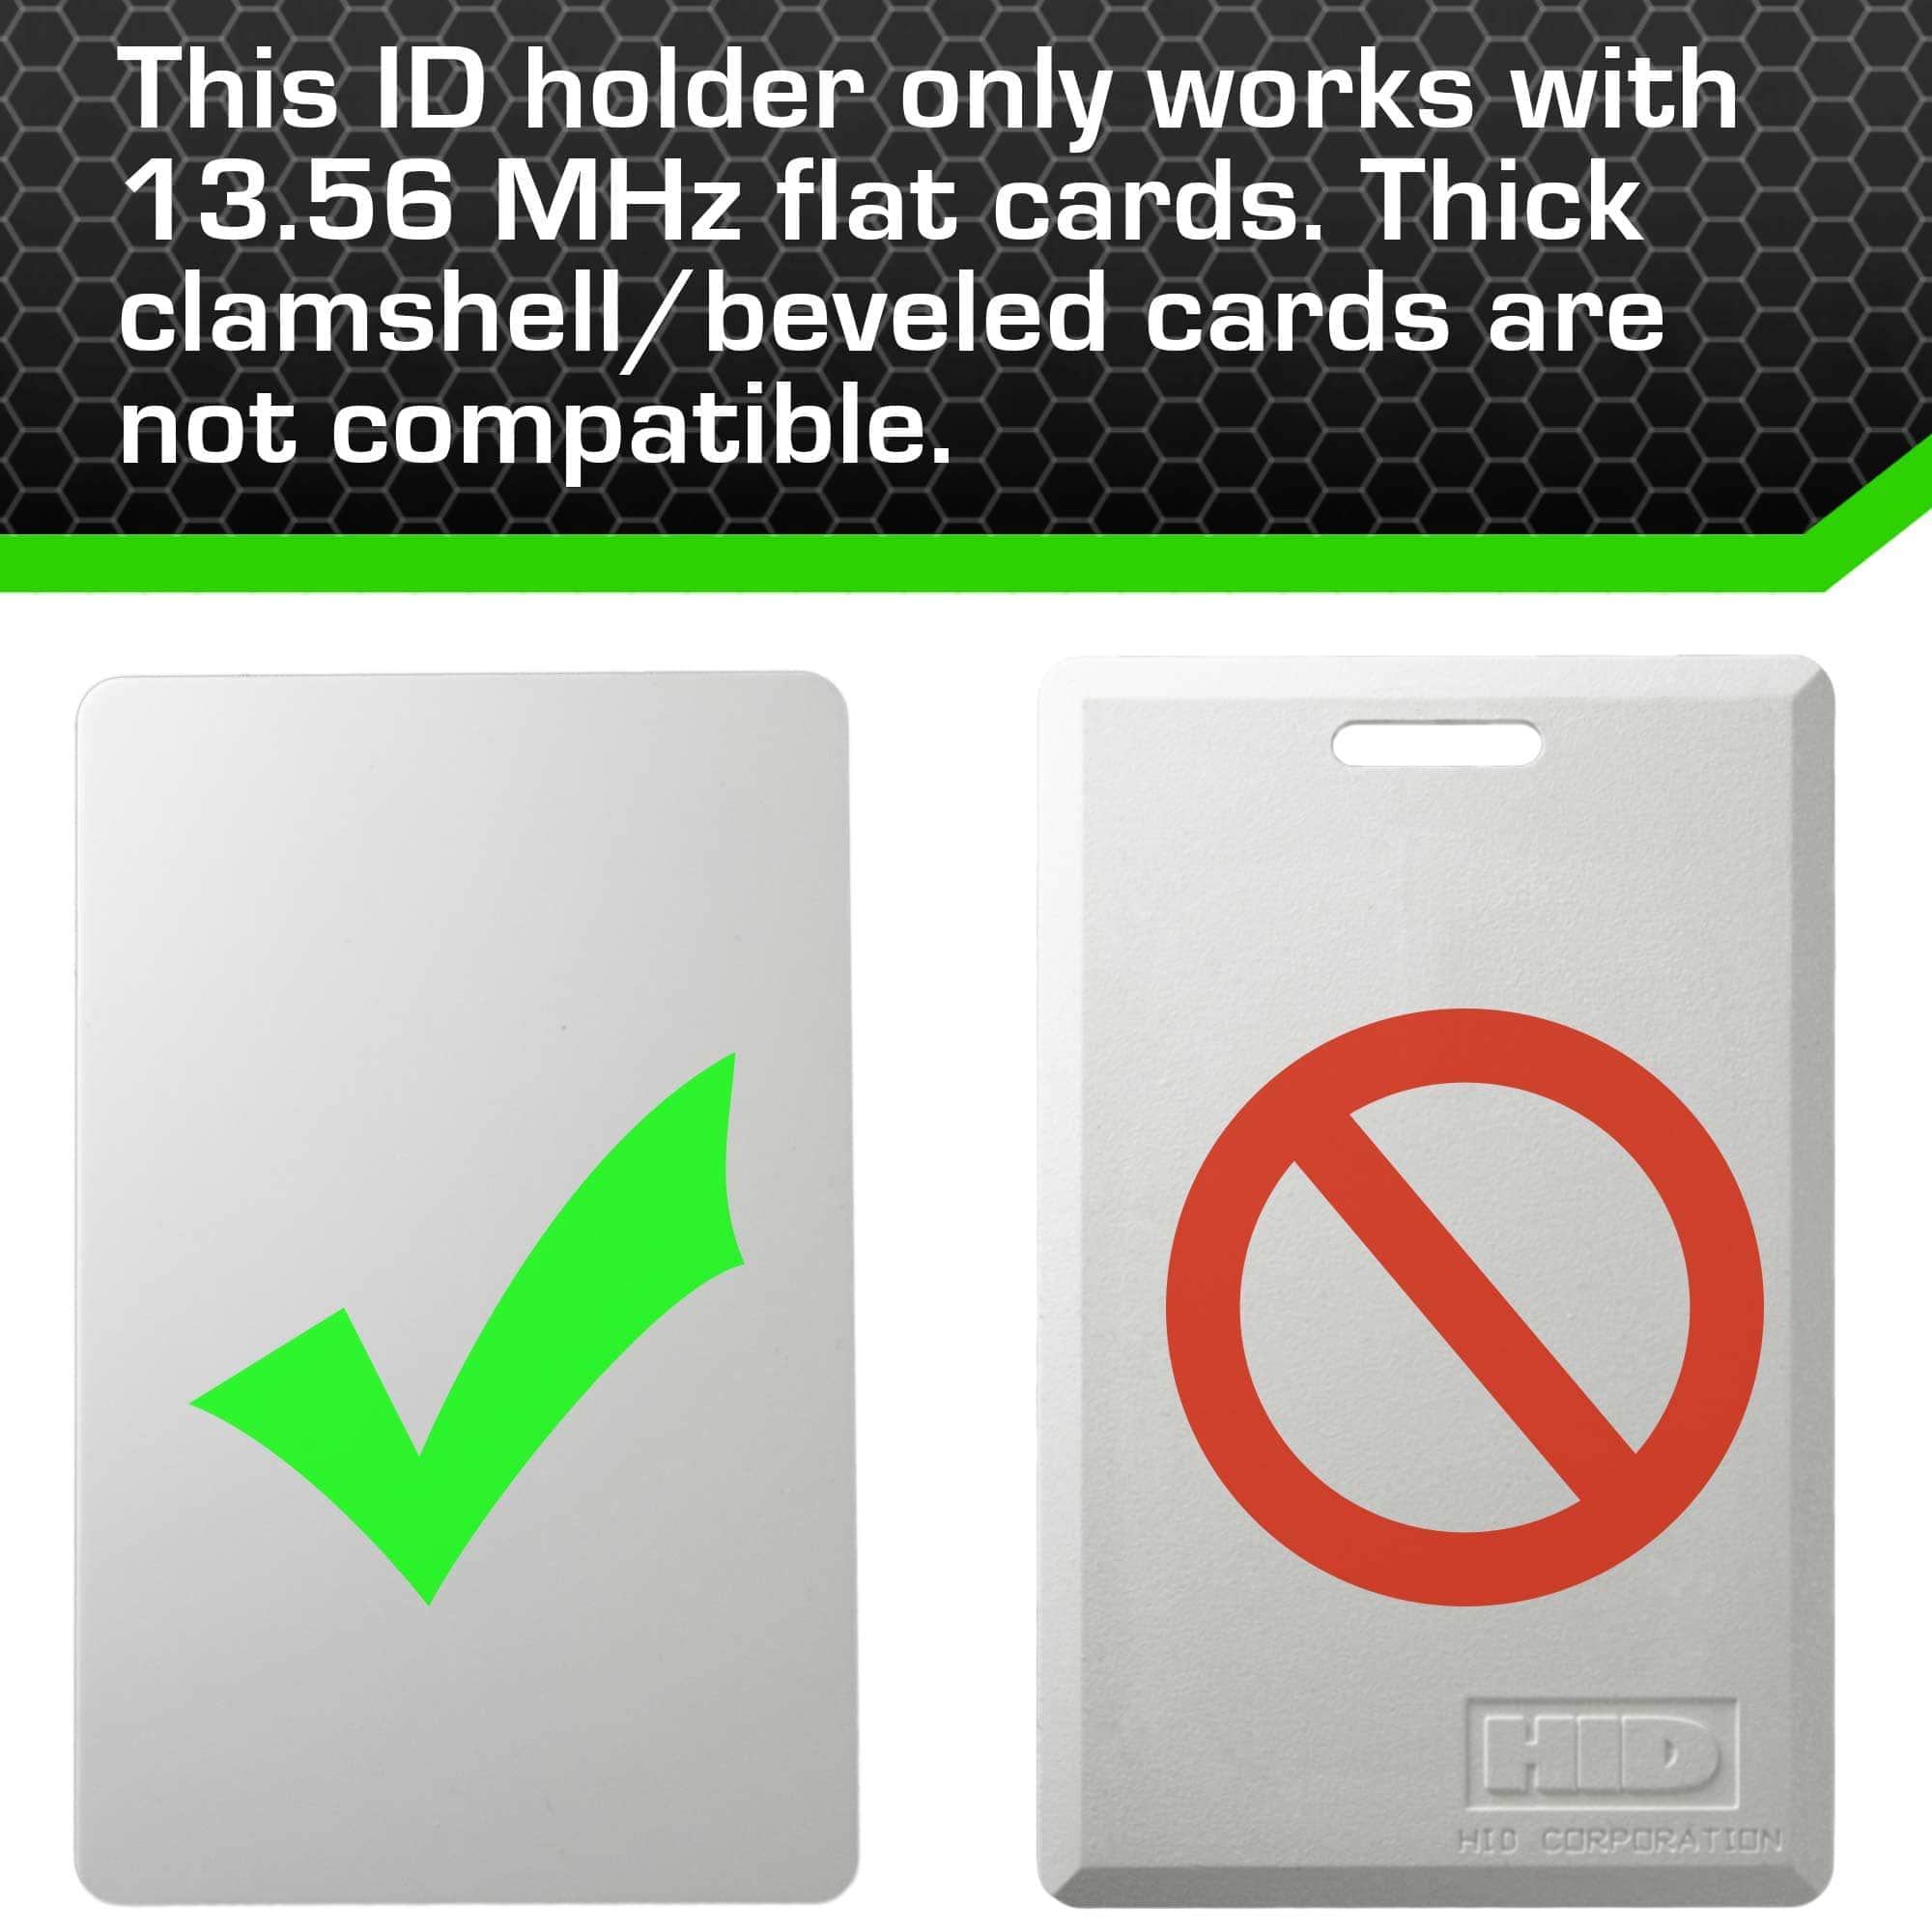 IDSH2004-001B-ID-Stronghold-DuoLite-Vertical-2-Card-Holder-compatibility